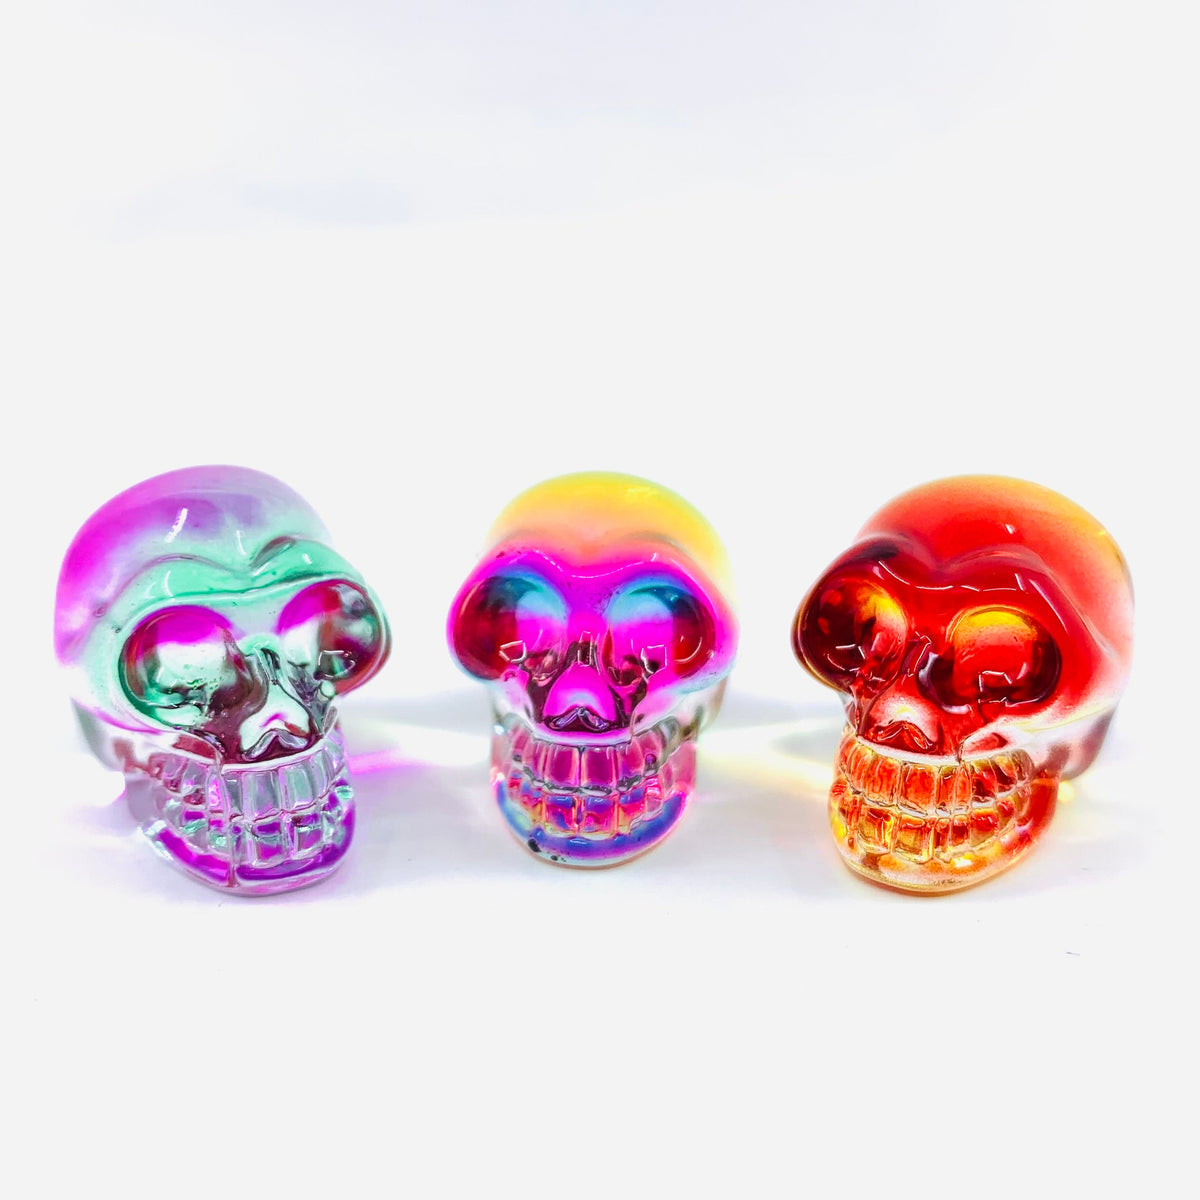 Colorful Glass Skulls Manufactured Overseas 